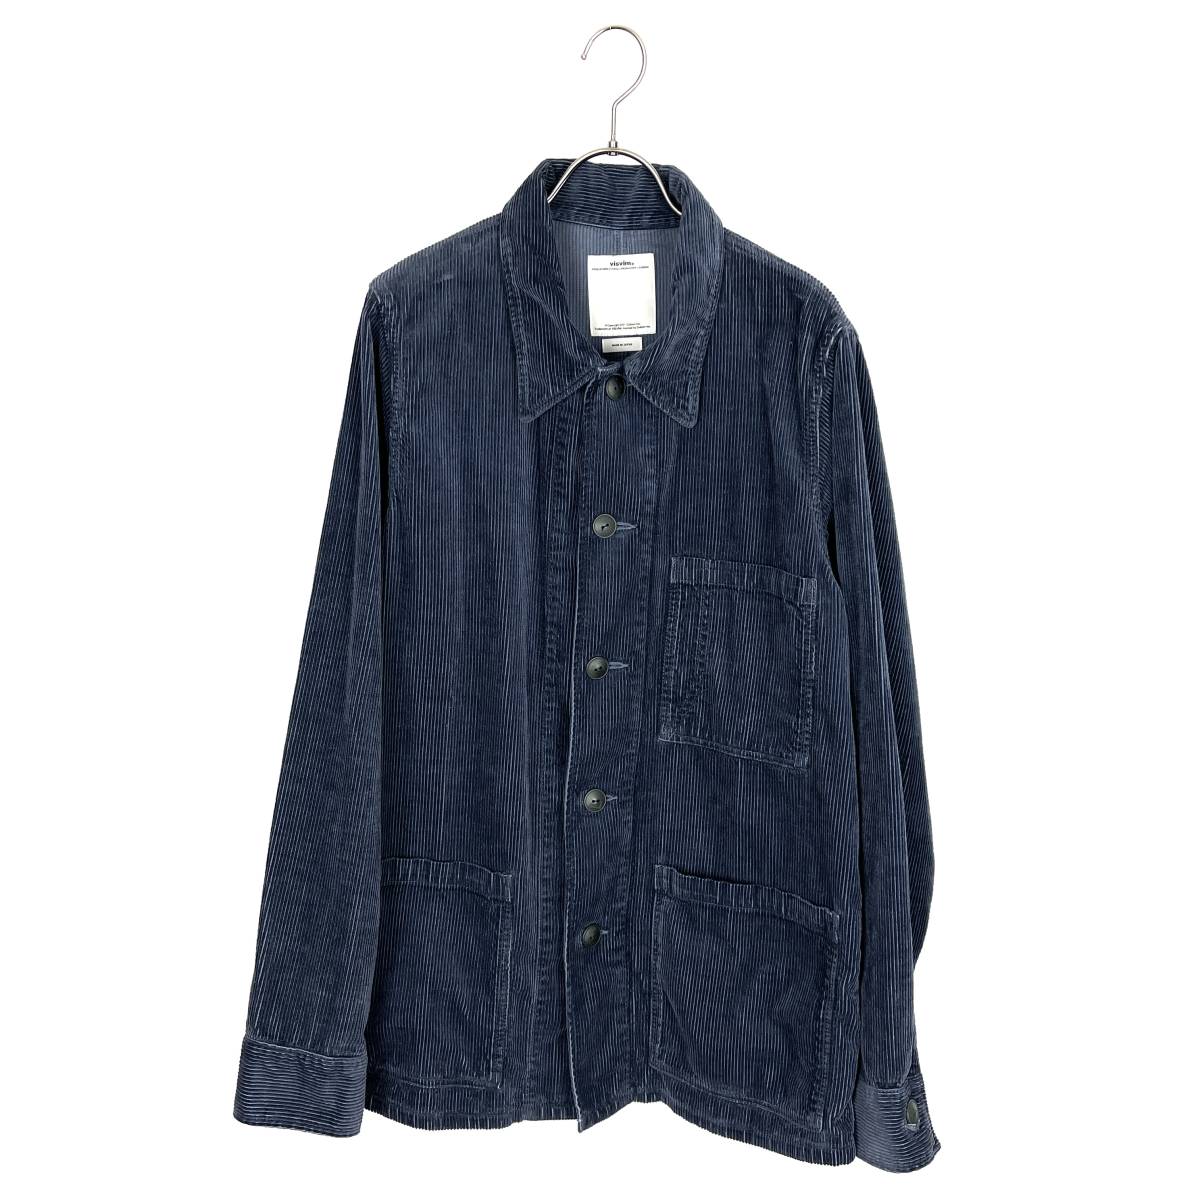 VISVIM(ビズビム) TRAVAIL COVERALL WALE CORDS 15AW (navy)